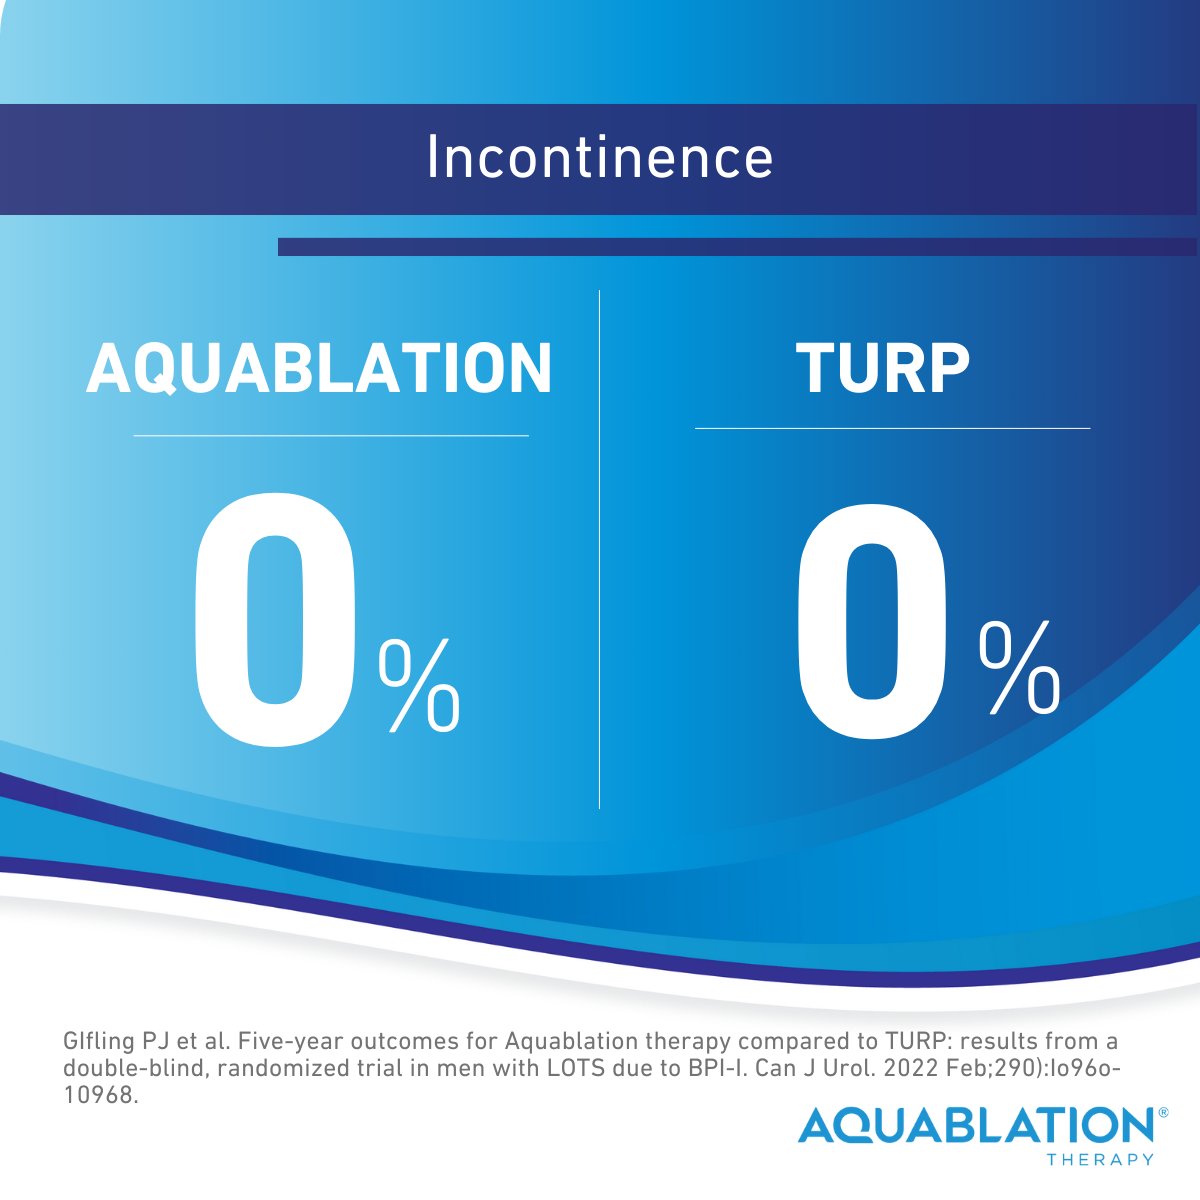 Discover how Aquablation therapy maintains a superior safety profile compared to TURP, ensuring better patient outcomes. #WATER #PatientSafety